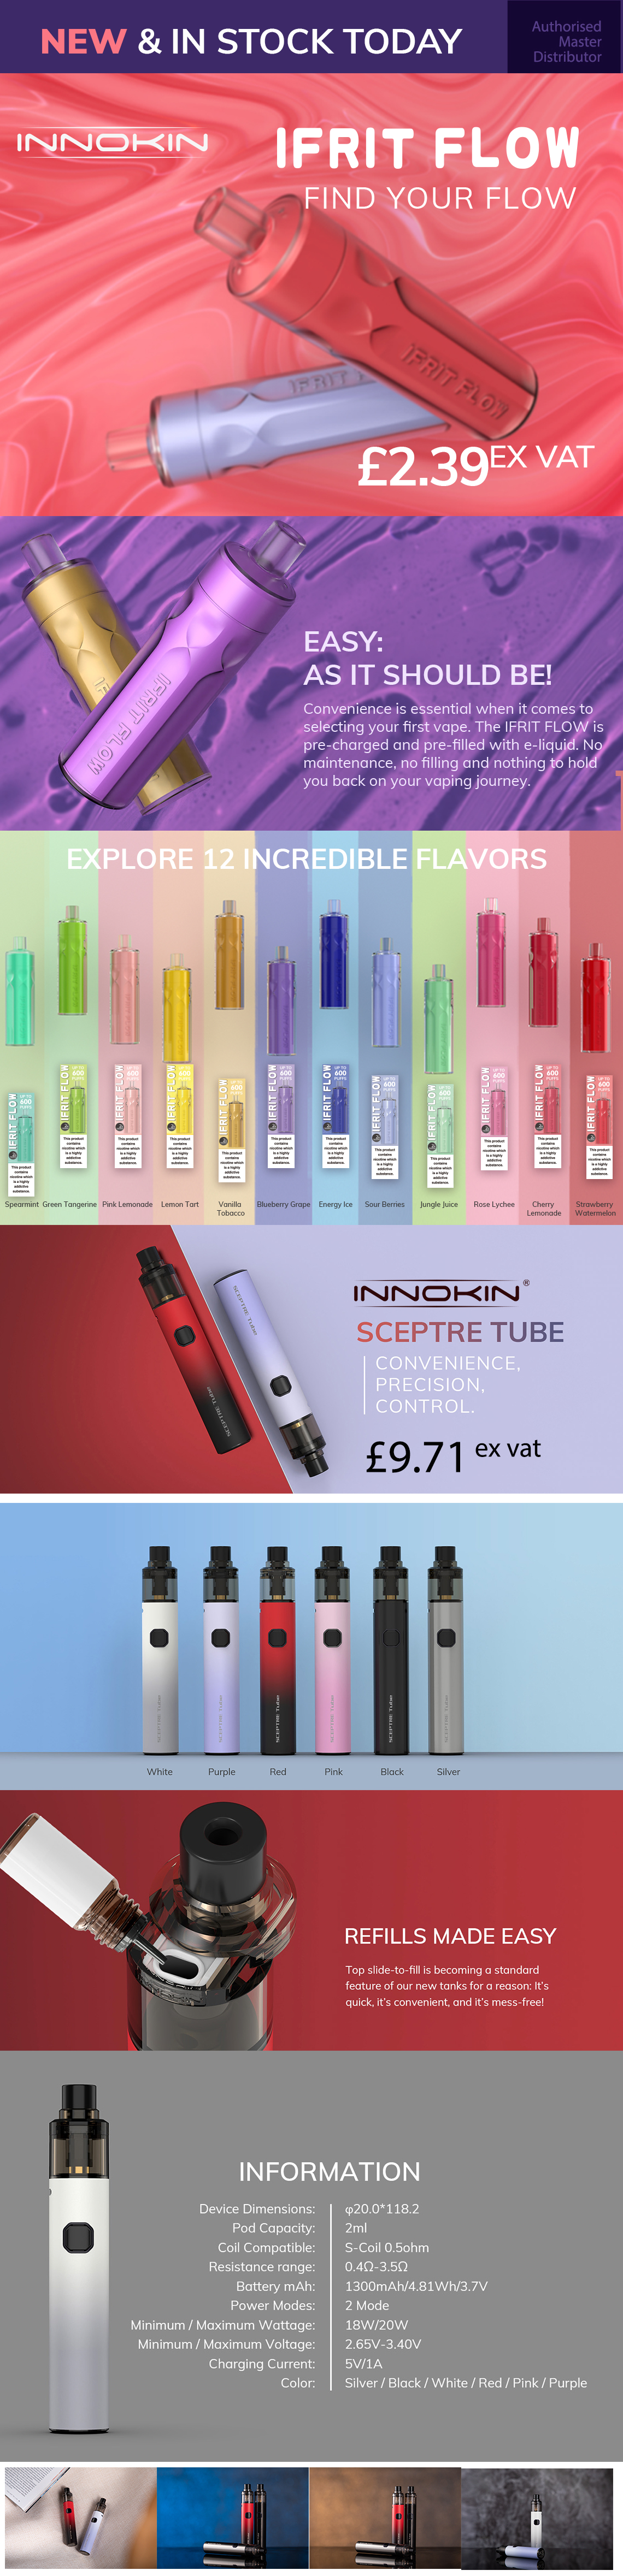 Innokin New Launches - Ifrit Flow and Spectre